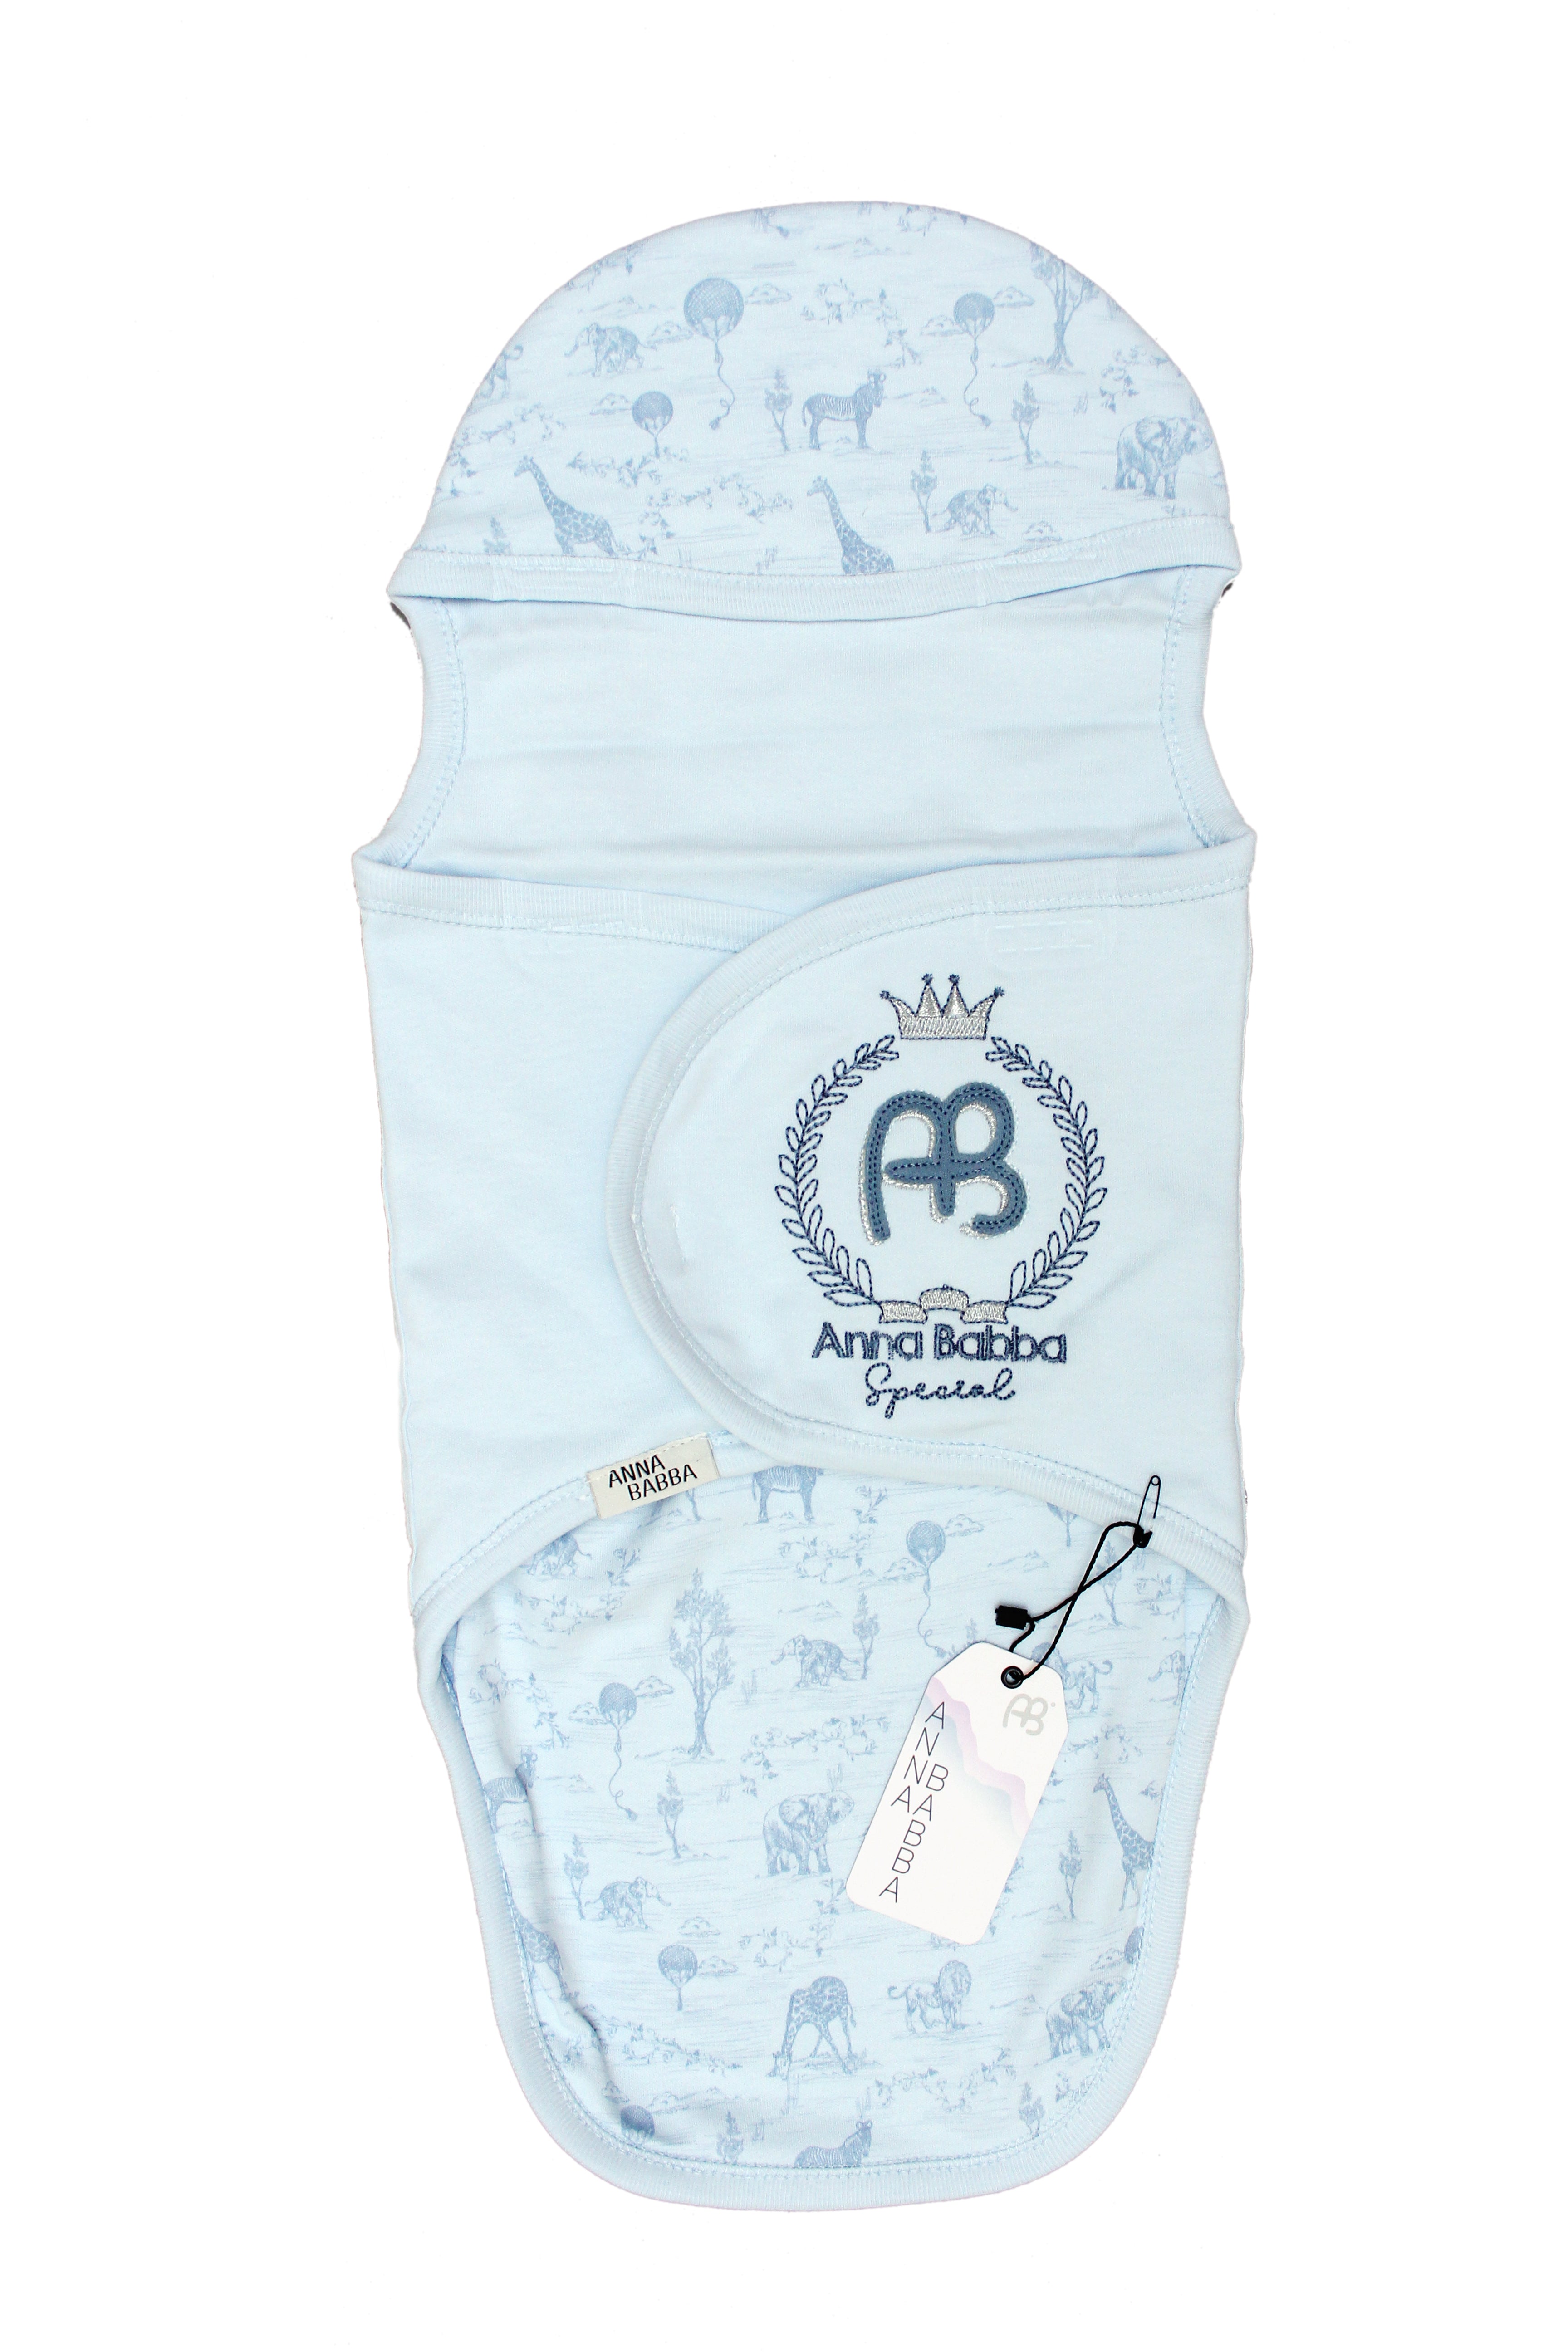 BABY SWADDLE WRAPPING NEST - 28118